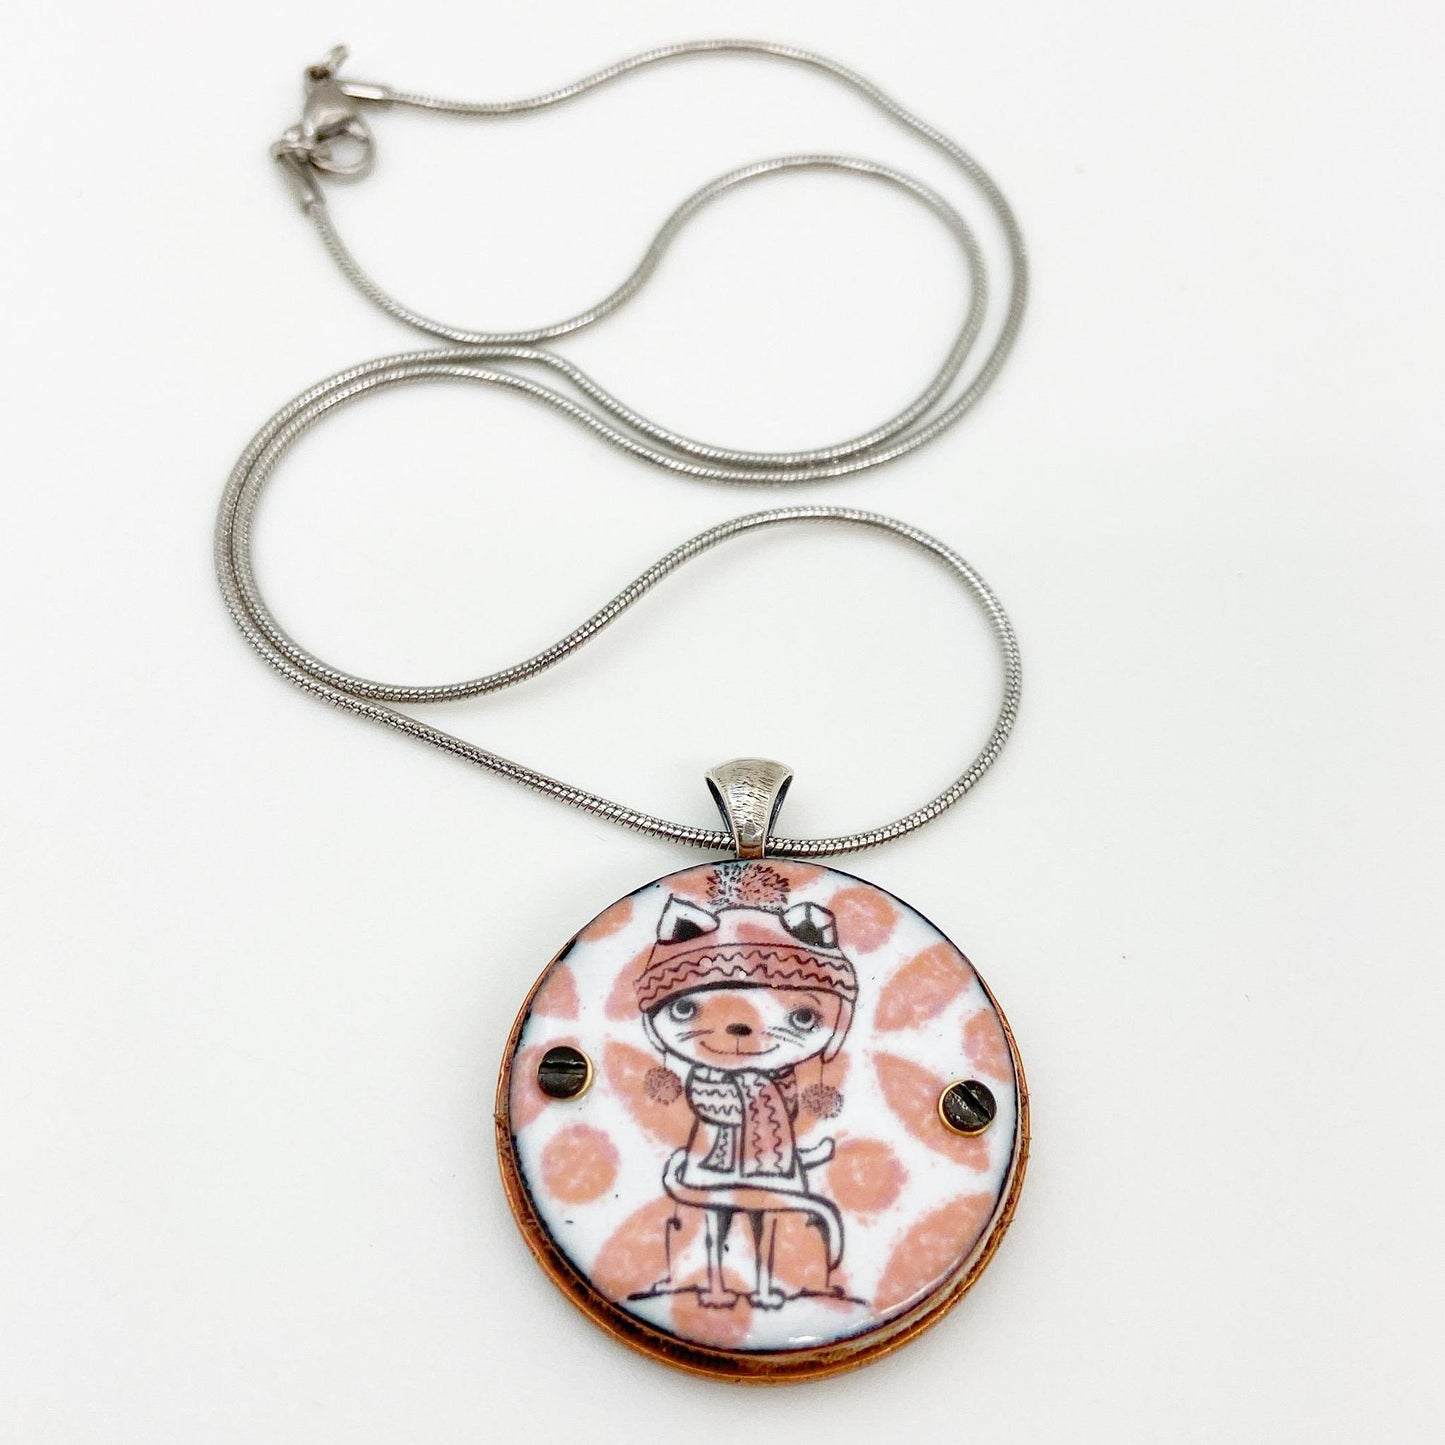 Necklace - Hat and Scarf Cat - Enamel on Copper & Coin